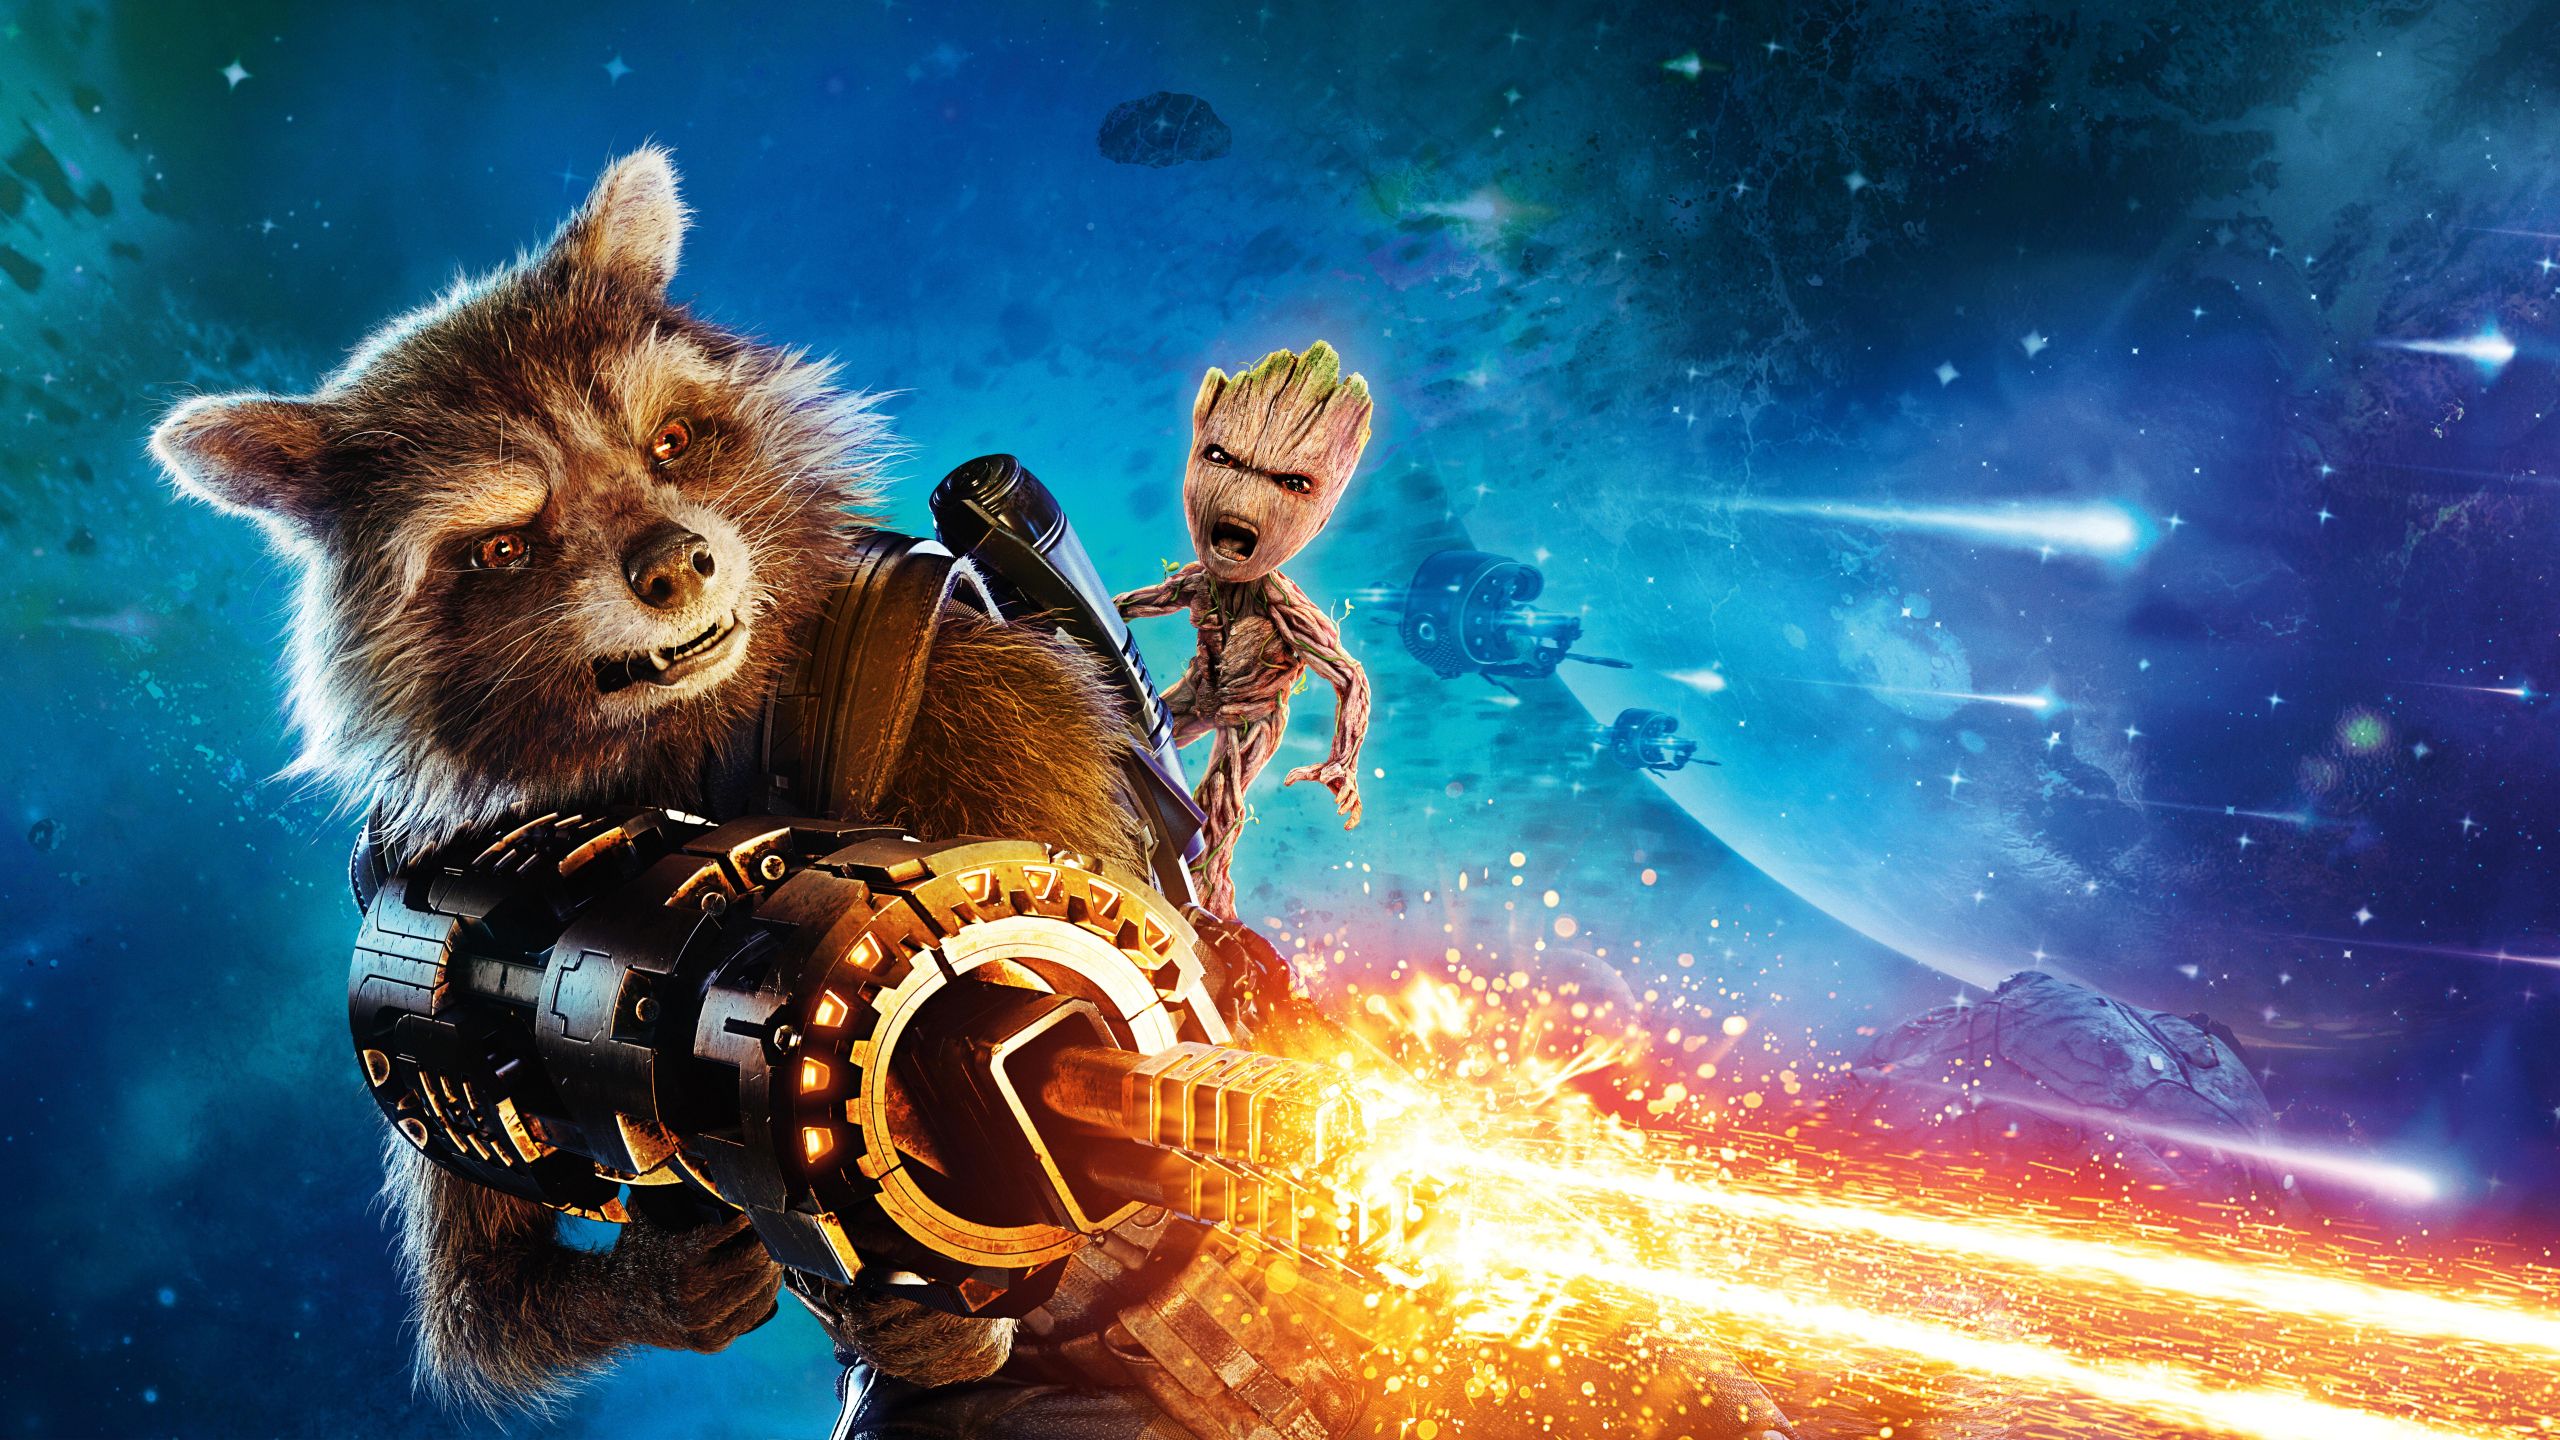 Desktop Wallpaper Baby Groot And Rocket Raccoon, Guardians Of The Galaxy Vol Movie, 4k, 8k, HD Image, Picture, Background, Rrwigd